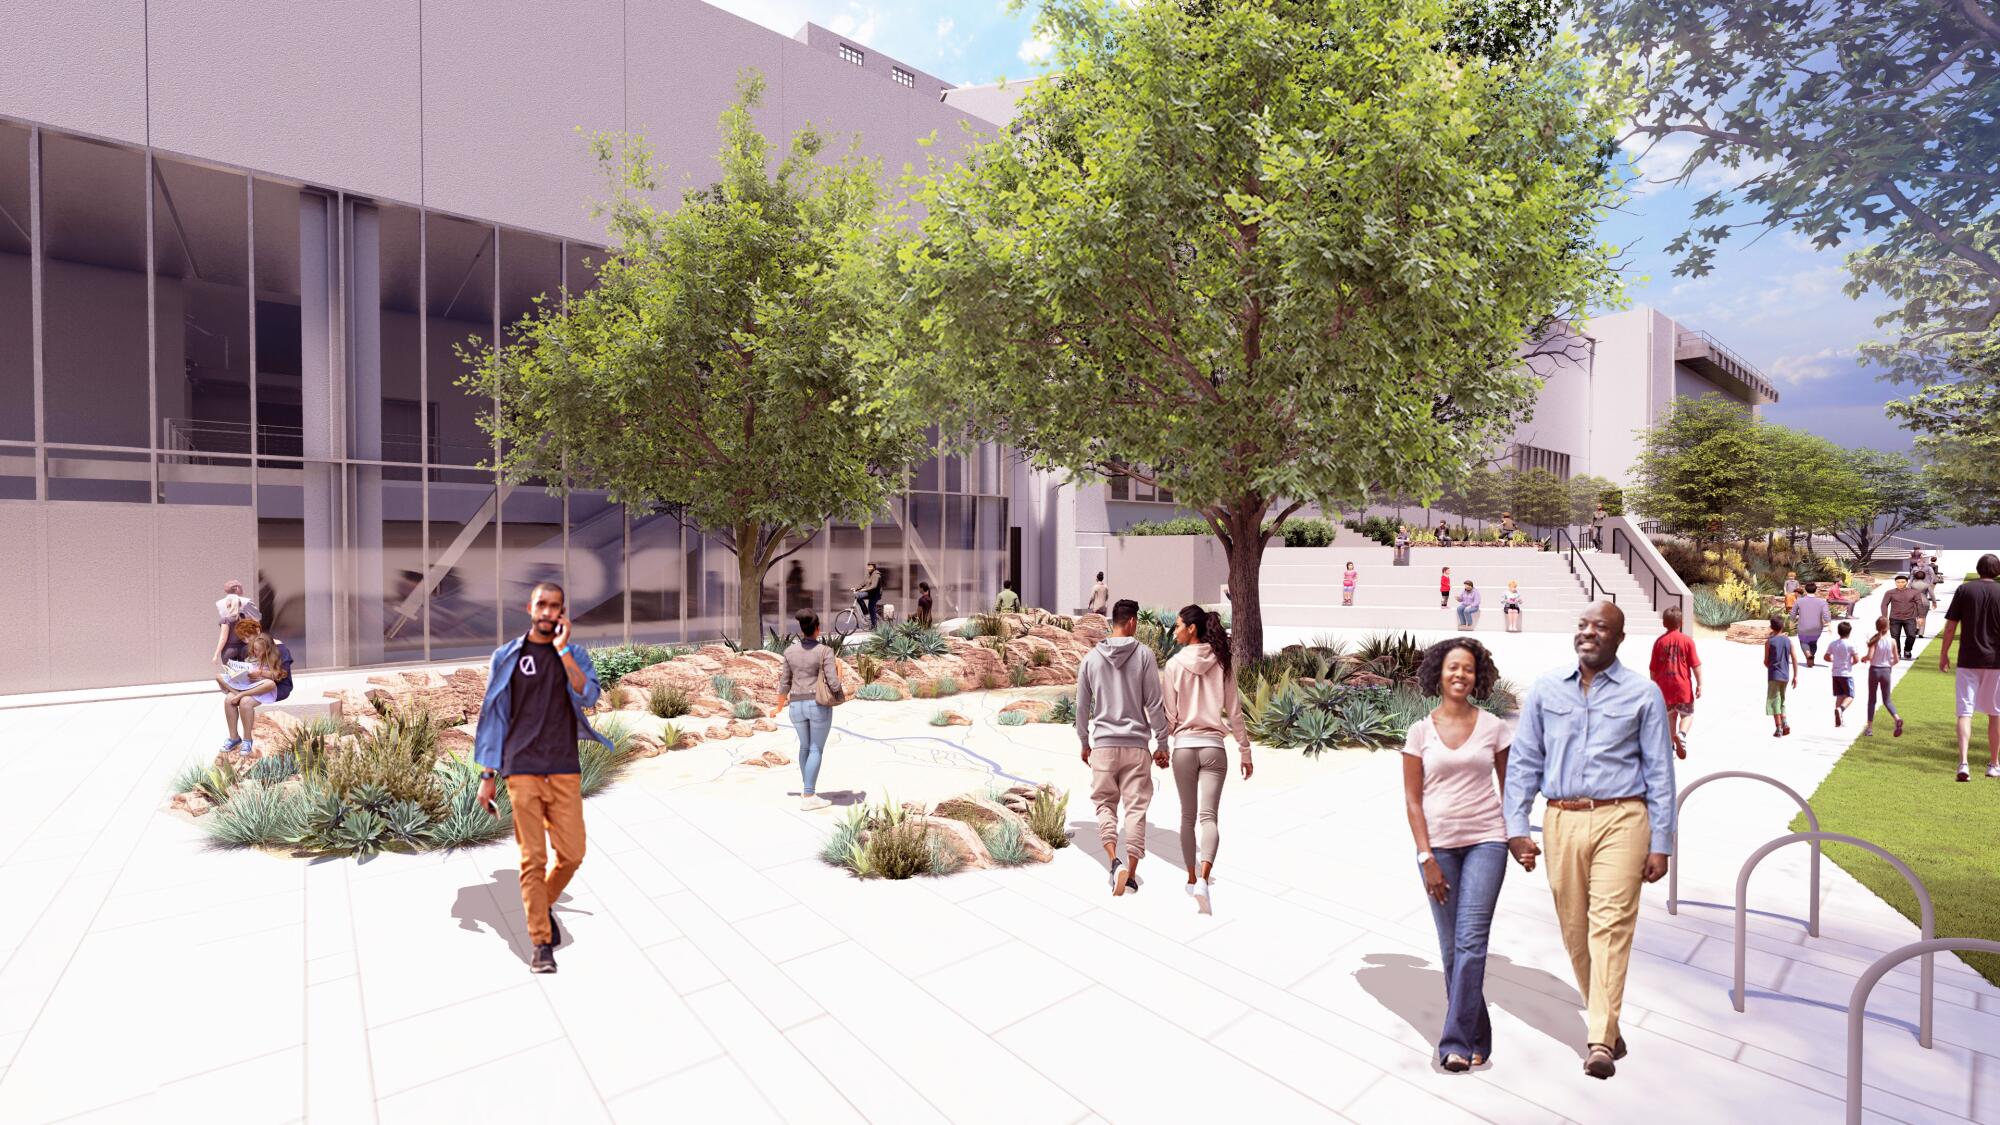 A rendering shows people walking through a landscaped plaza before a building with glass walls.